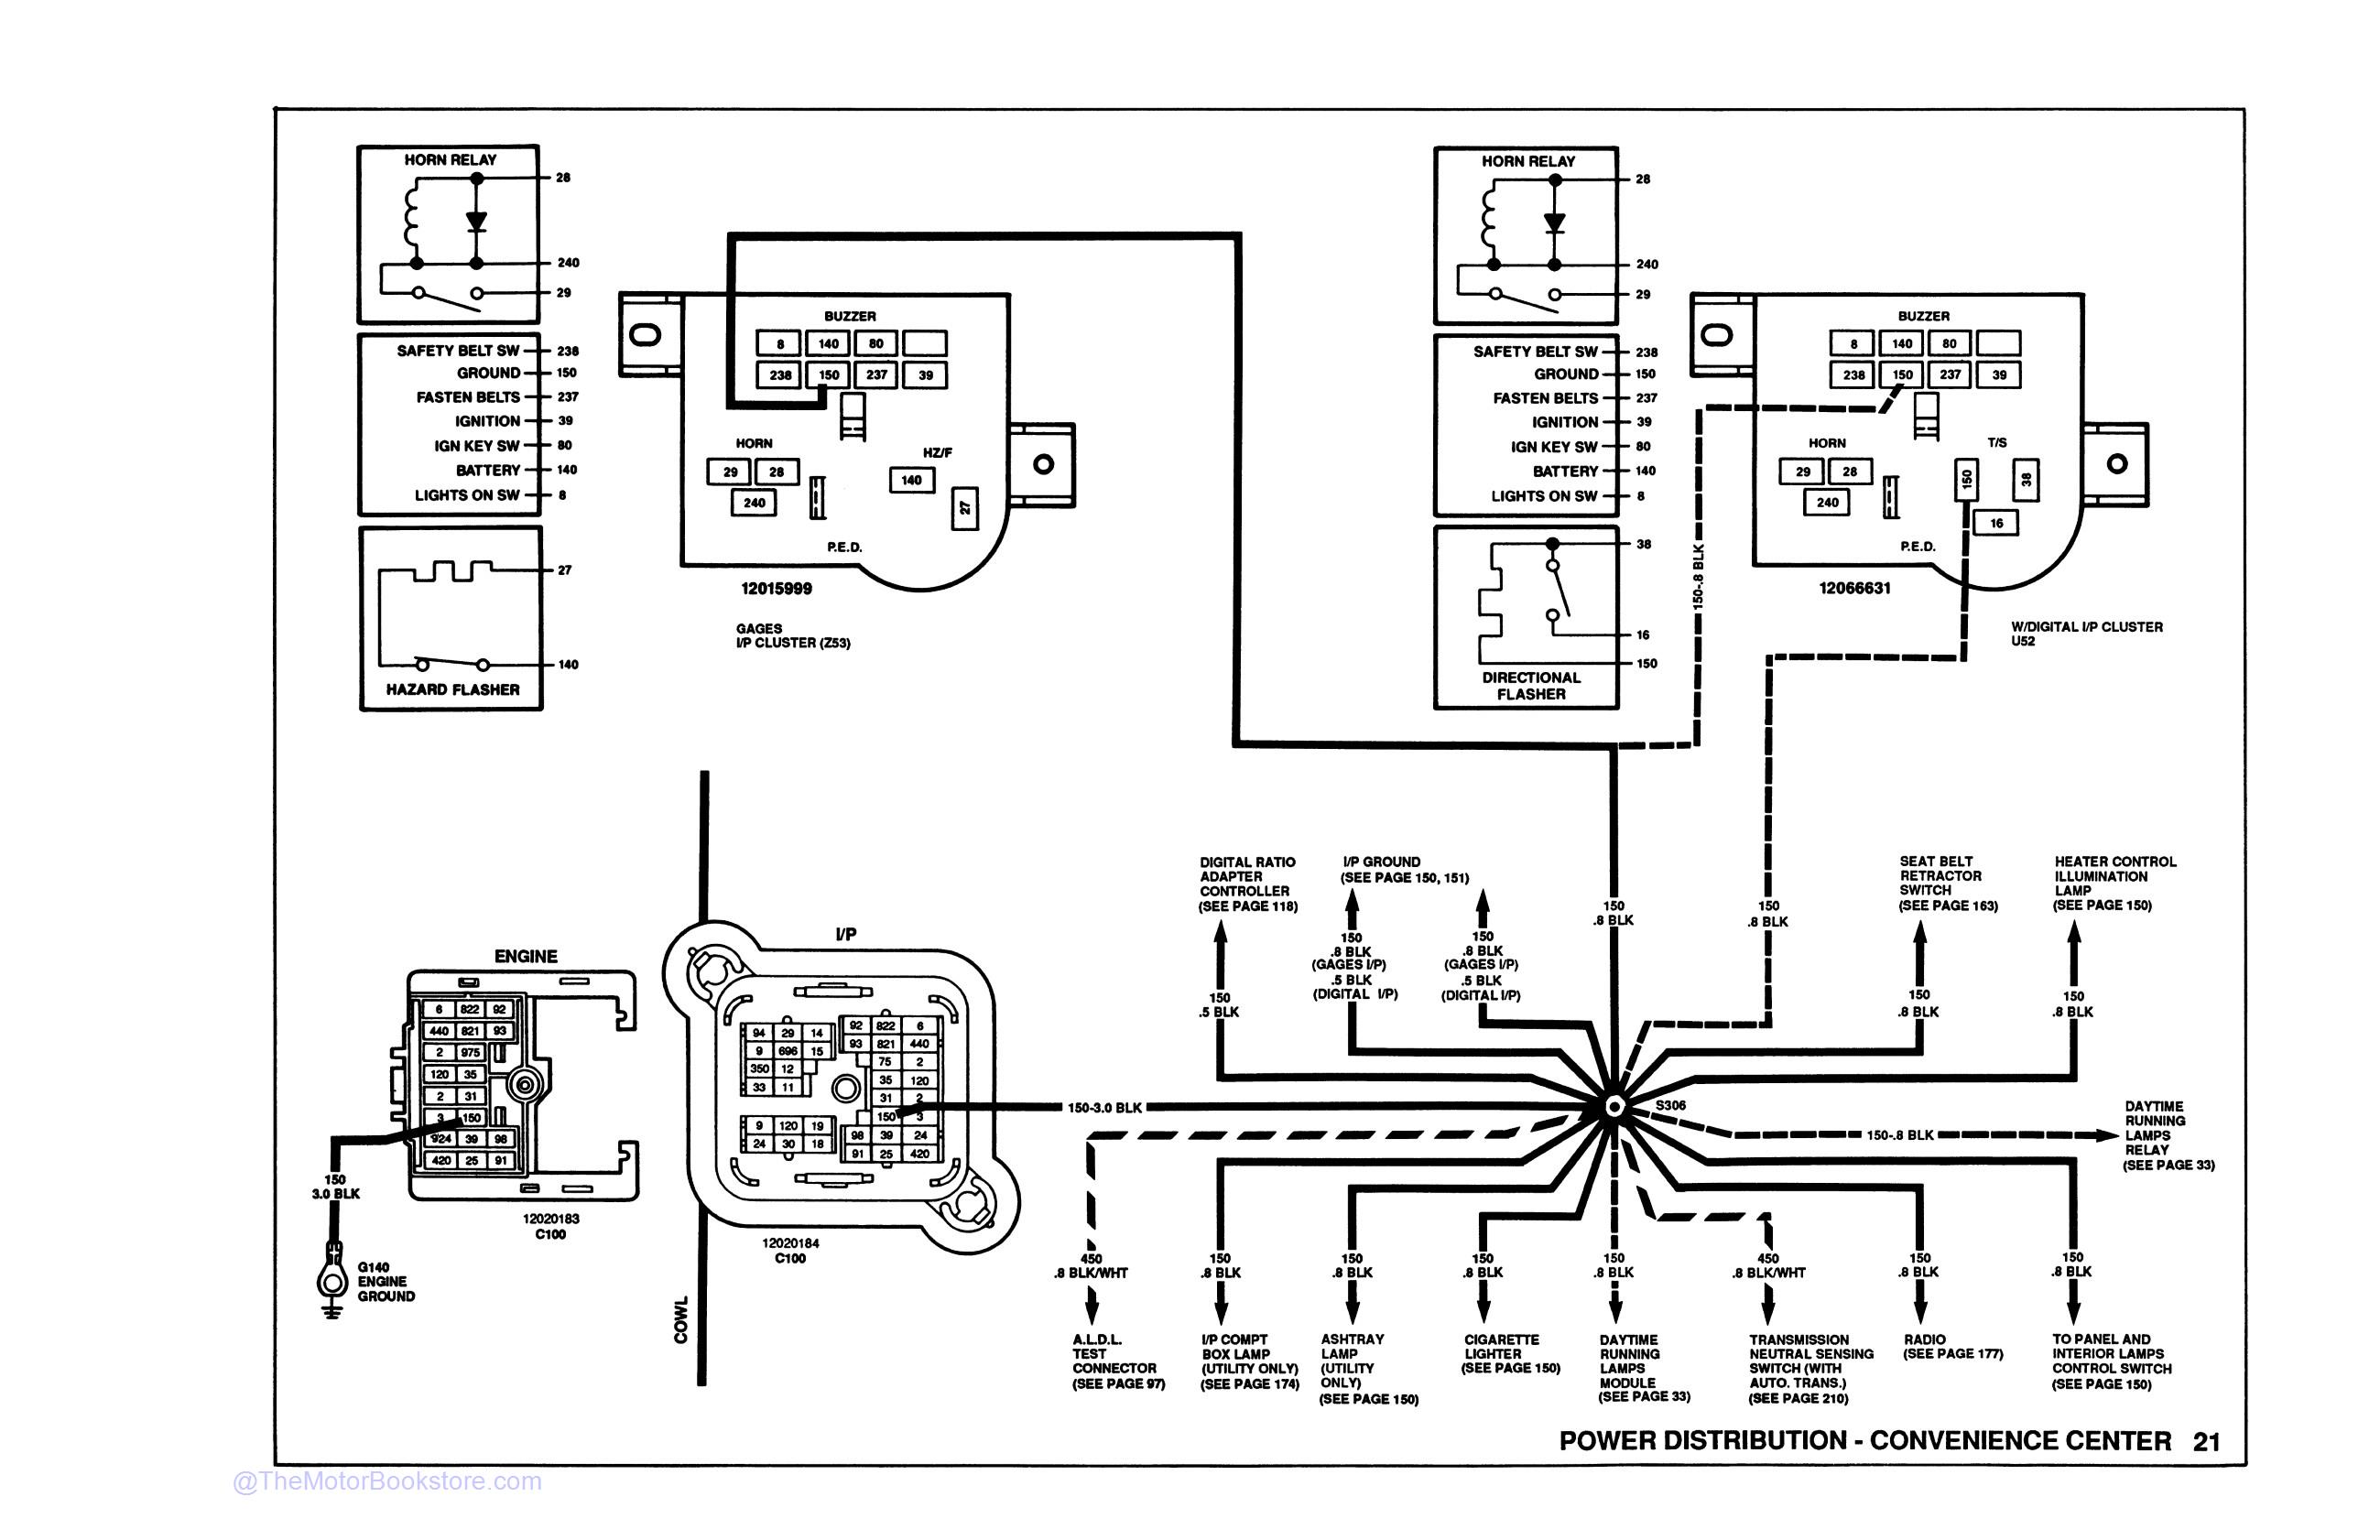 1991 Chevrolet S-10 Truck Electrical Diagnosis & Wiring Diagrams - Sample Page